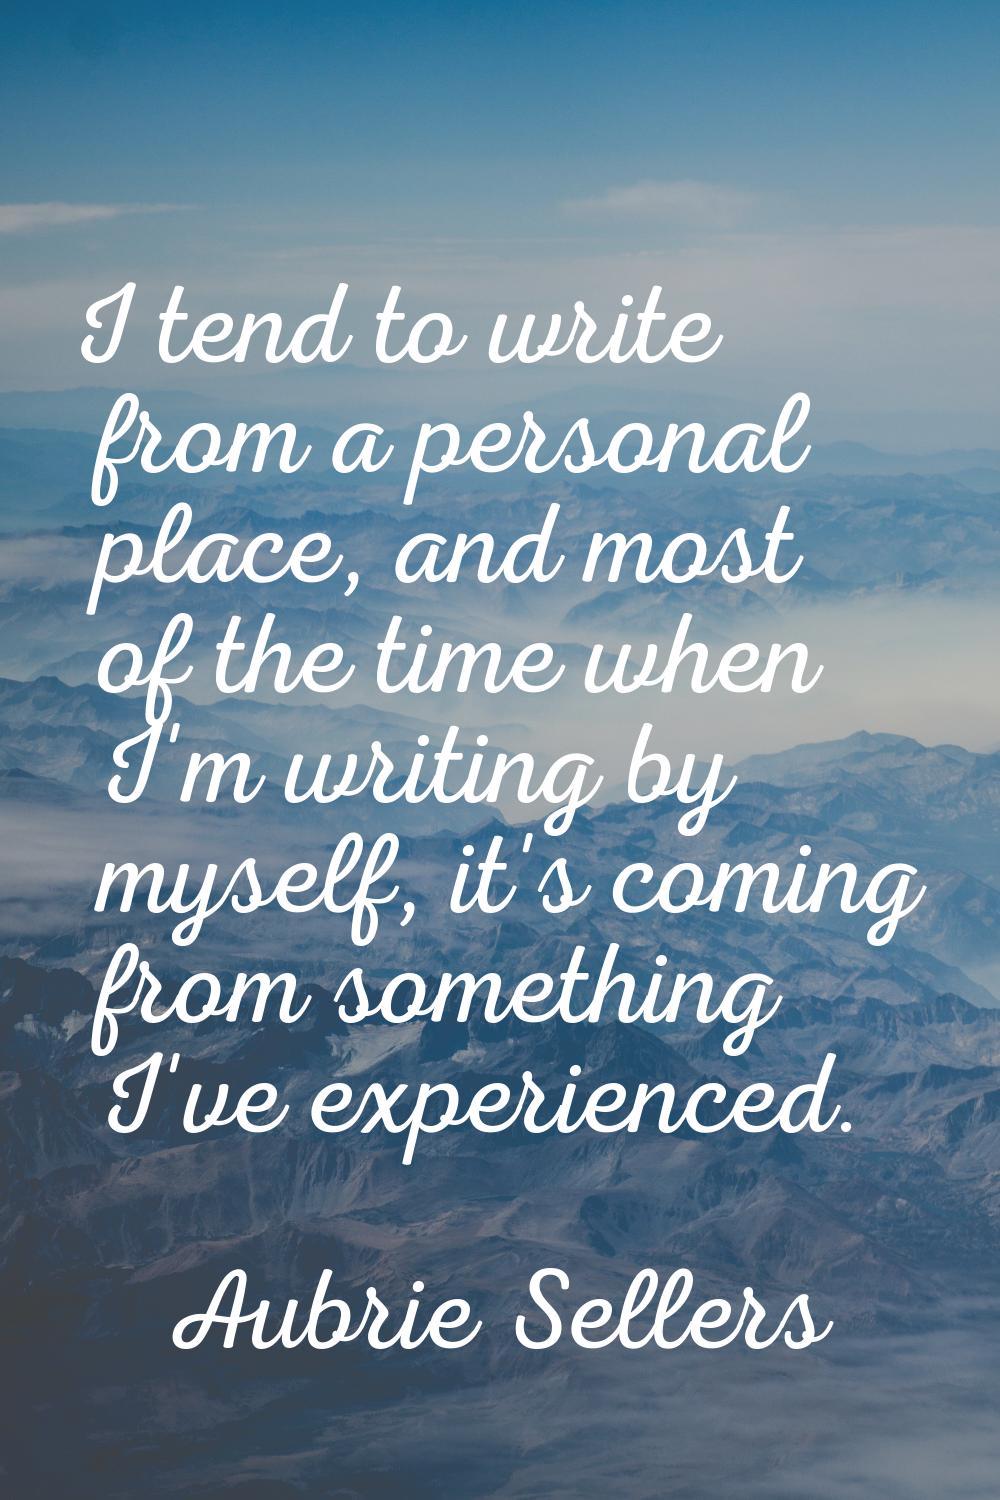 I tend to write from a personal place, and most of the time when I'm writing by myself, it's coming